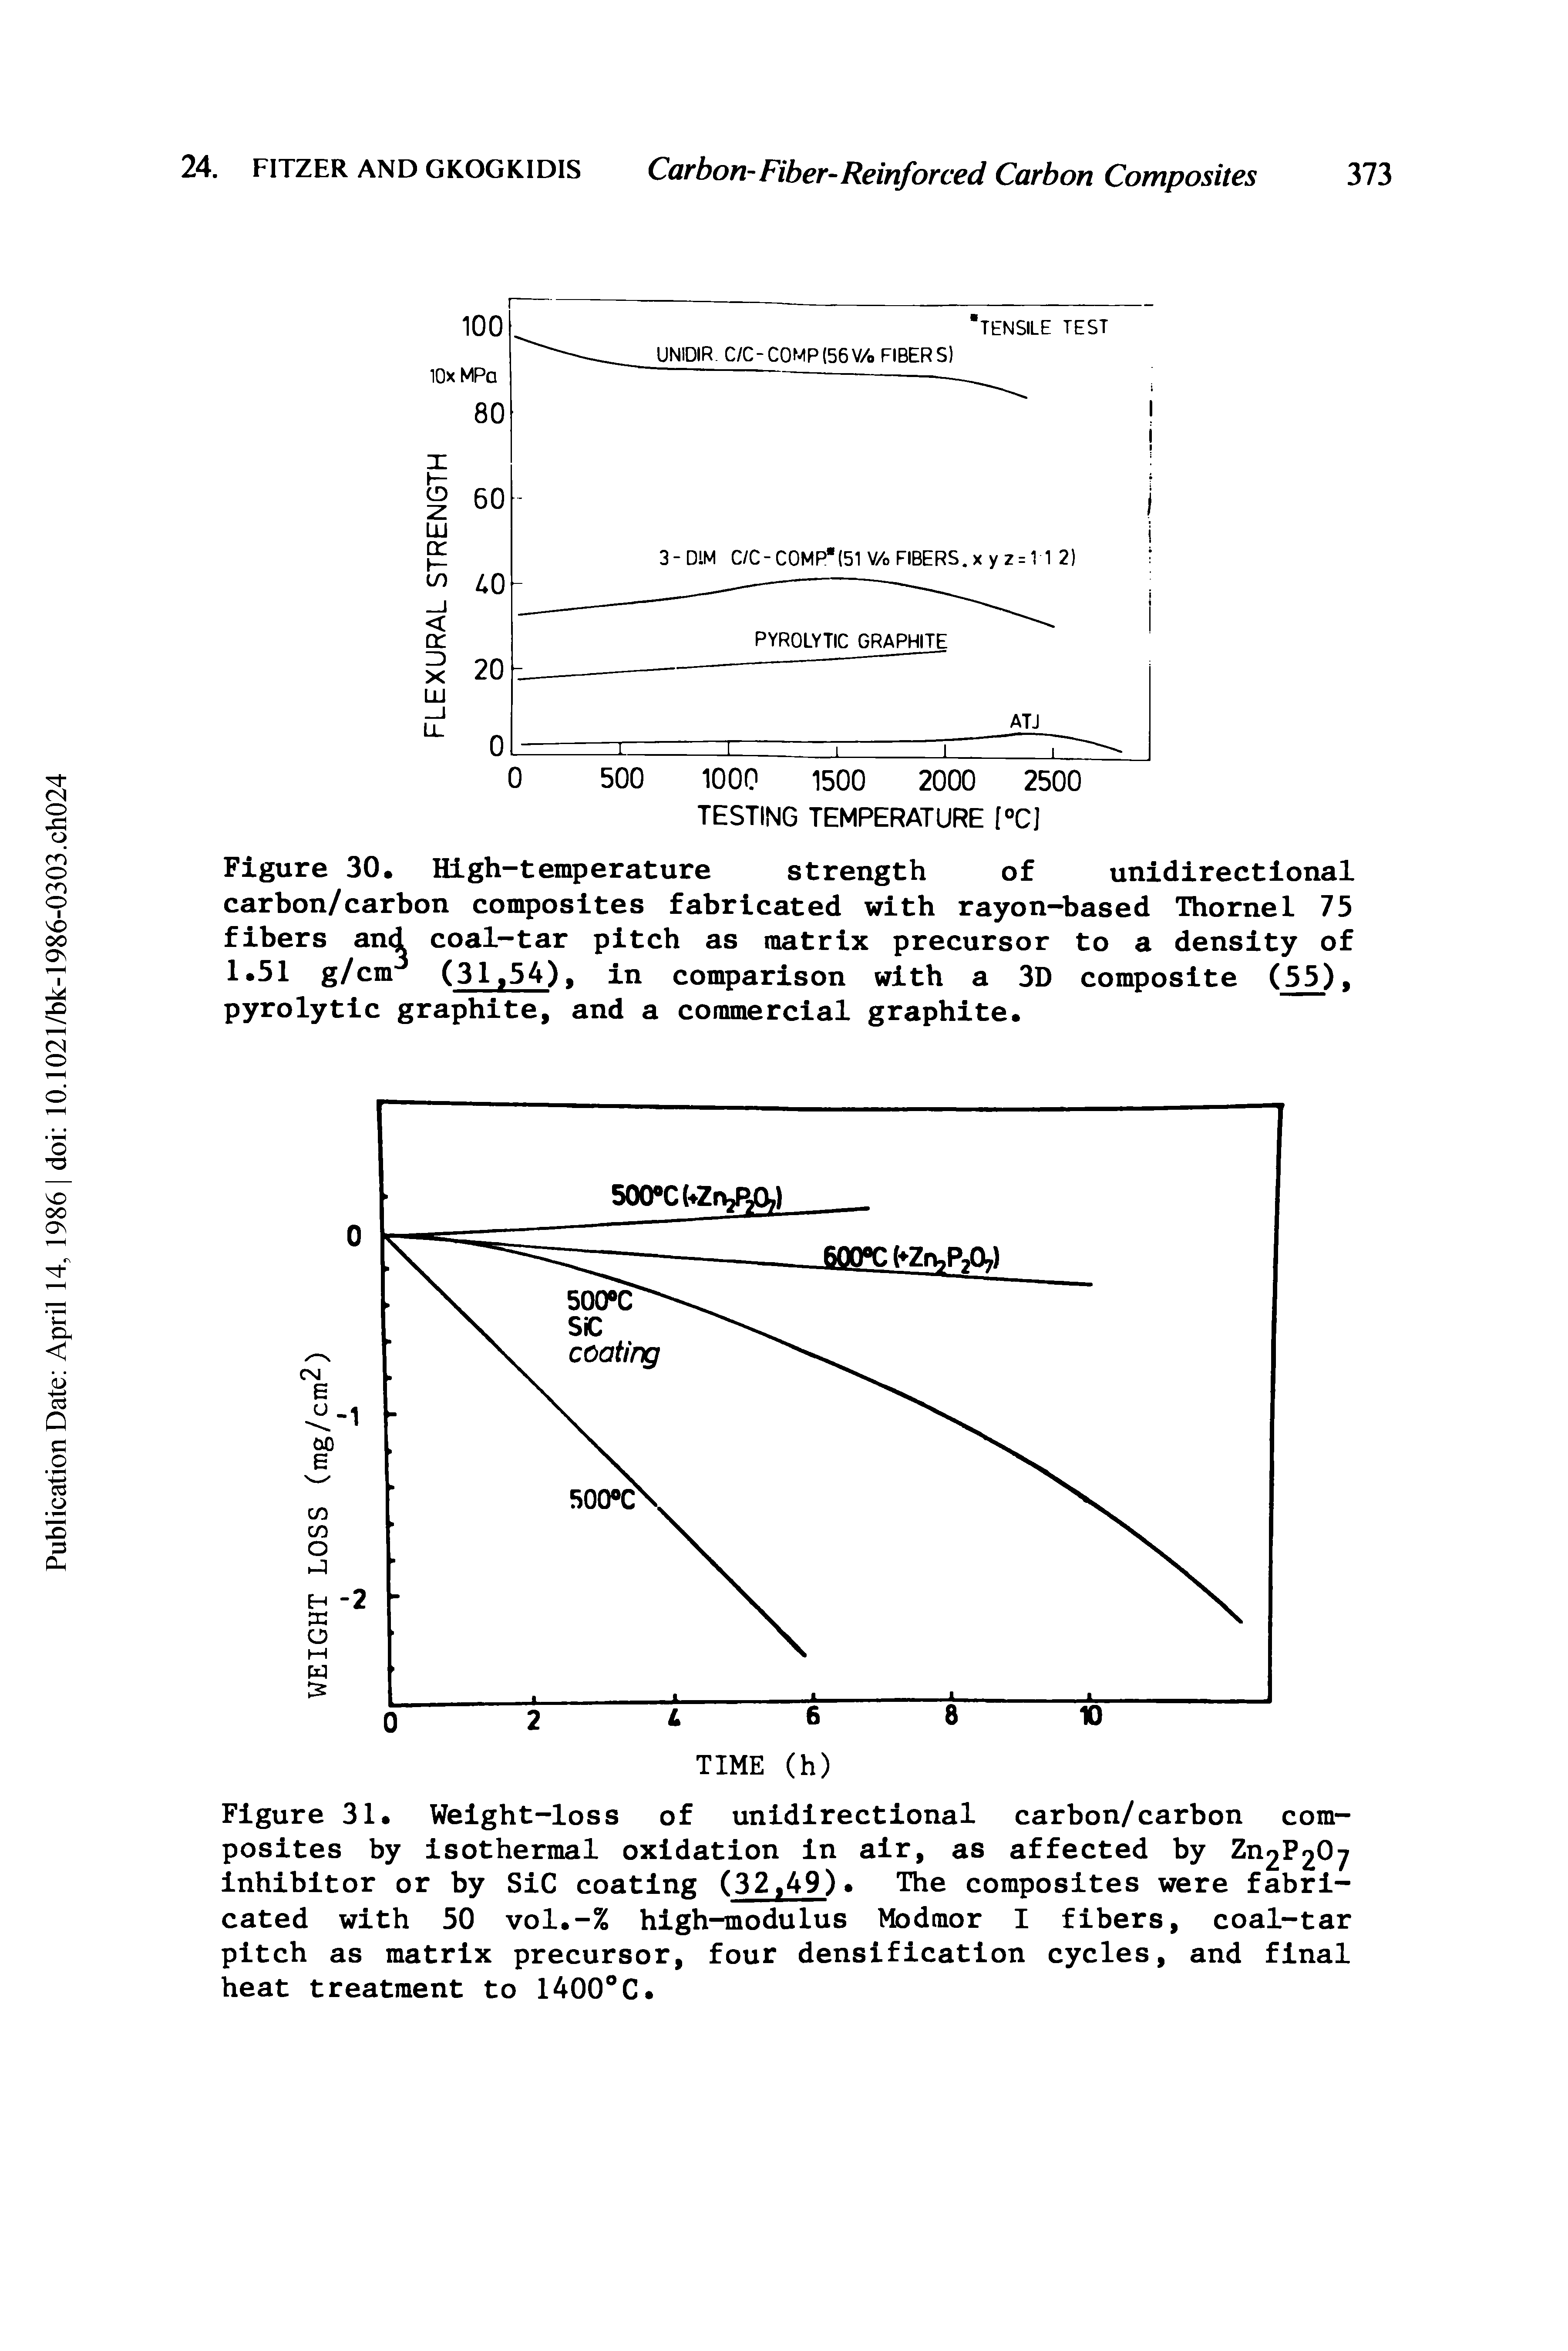 Figure 30. High-temperature strength of unidirectional carbon/carbon composites fabricated with rayon-based Thorne1 75 fibers and coal-tar pitch as matrix precursor to a density of 1.51 g/cmJ (31,54), in comparison with a 3D composite (55), pyrolytic graphite, and a commercial graphite.